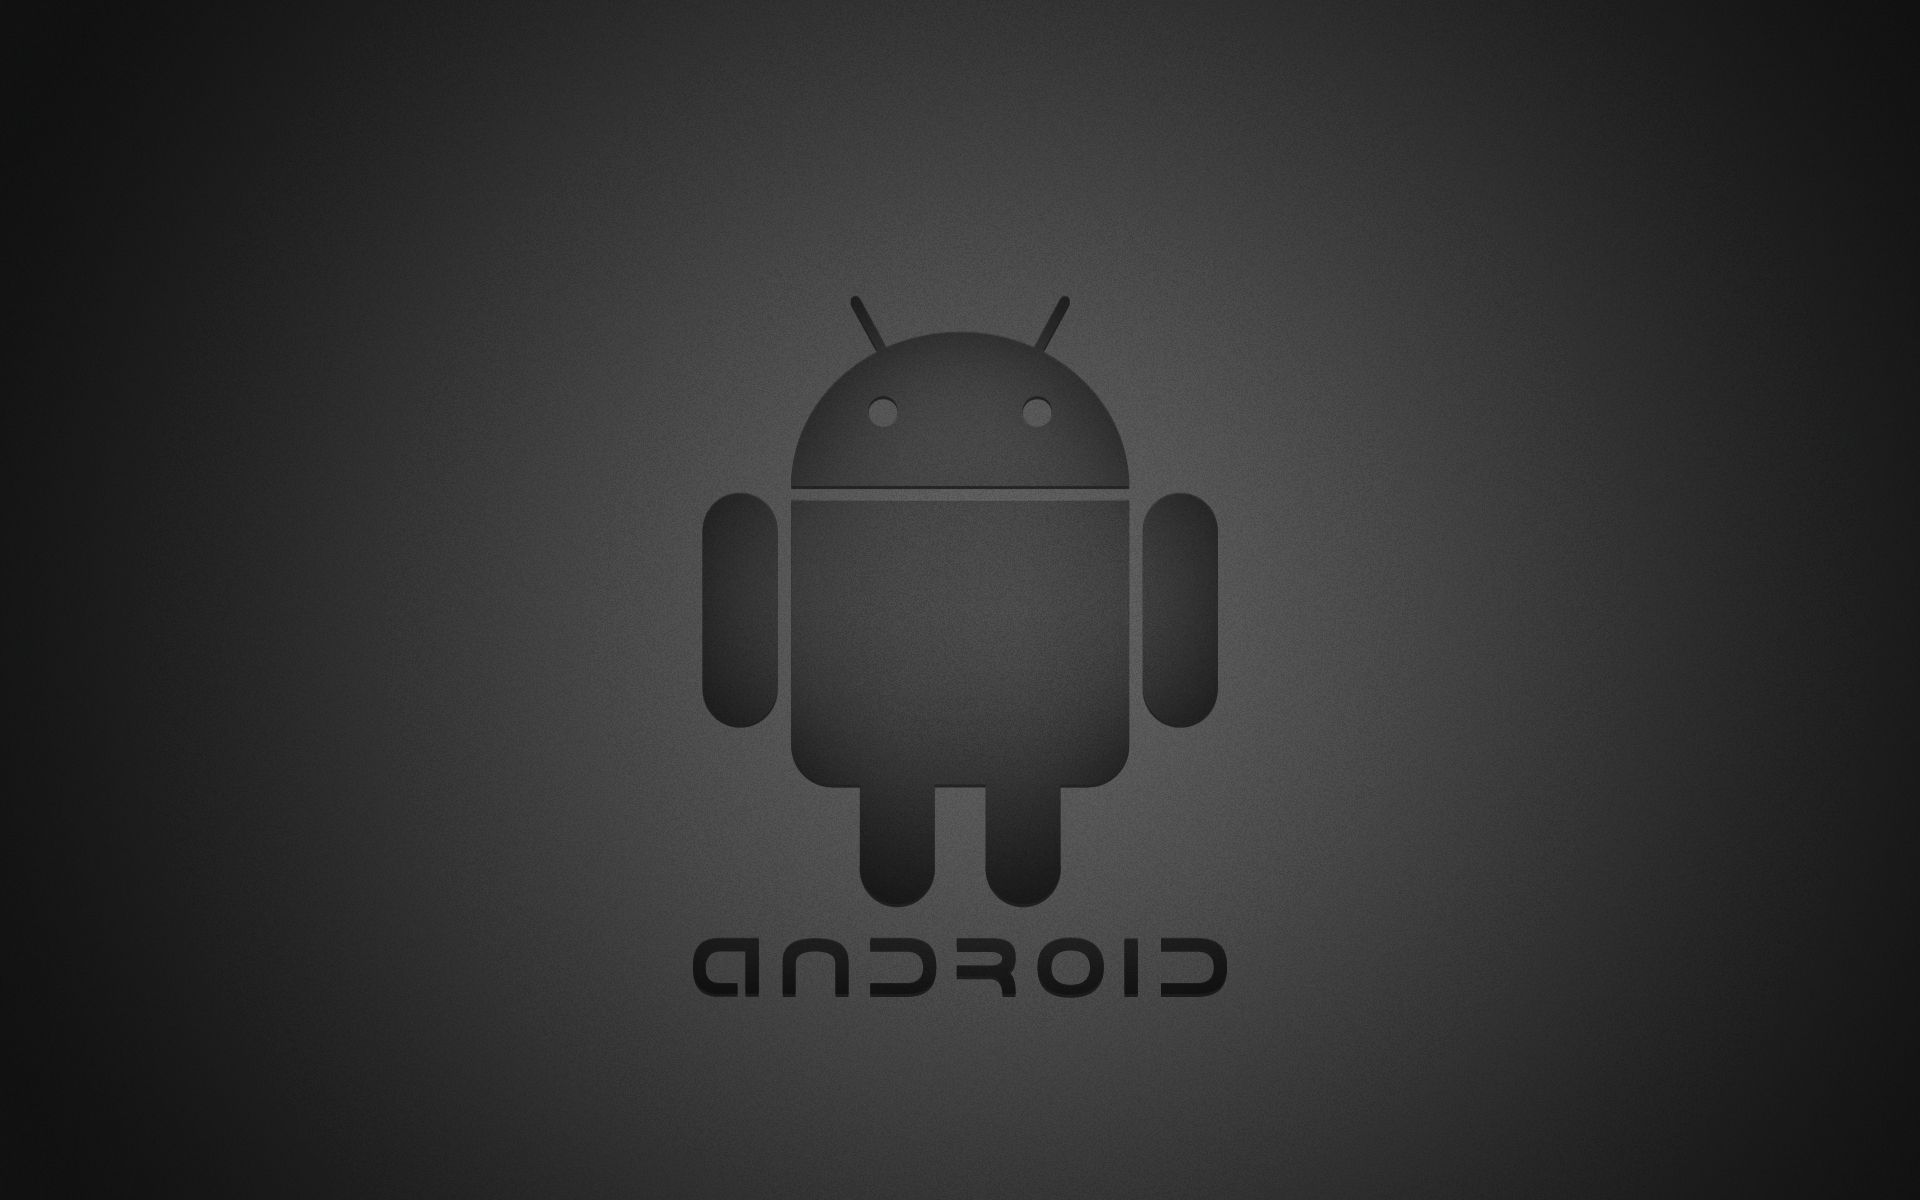 Android Tablet wallpaper | 1920x1200 | #22139